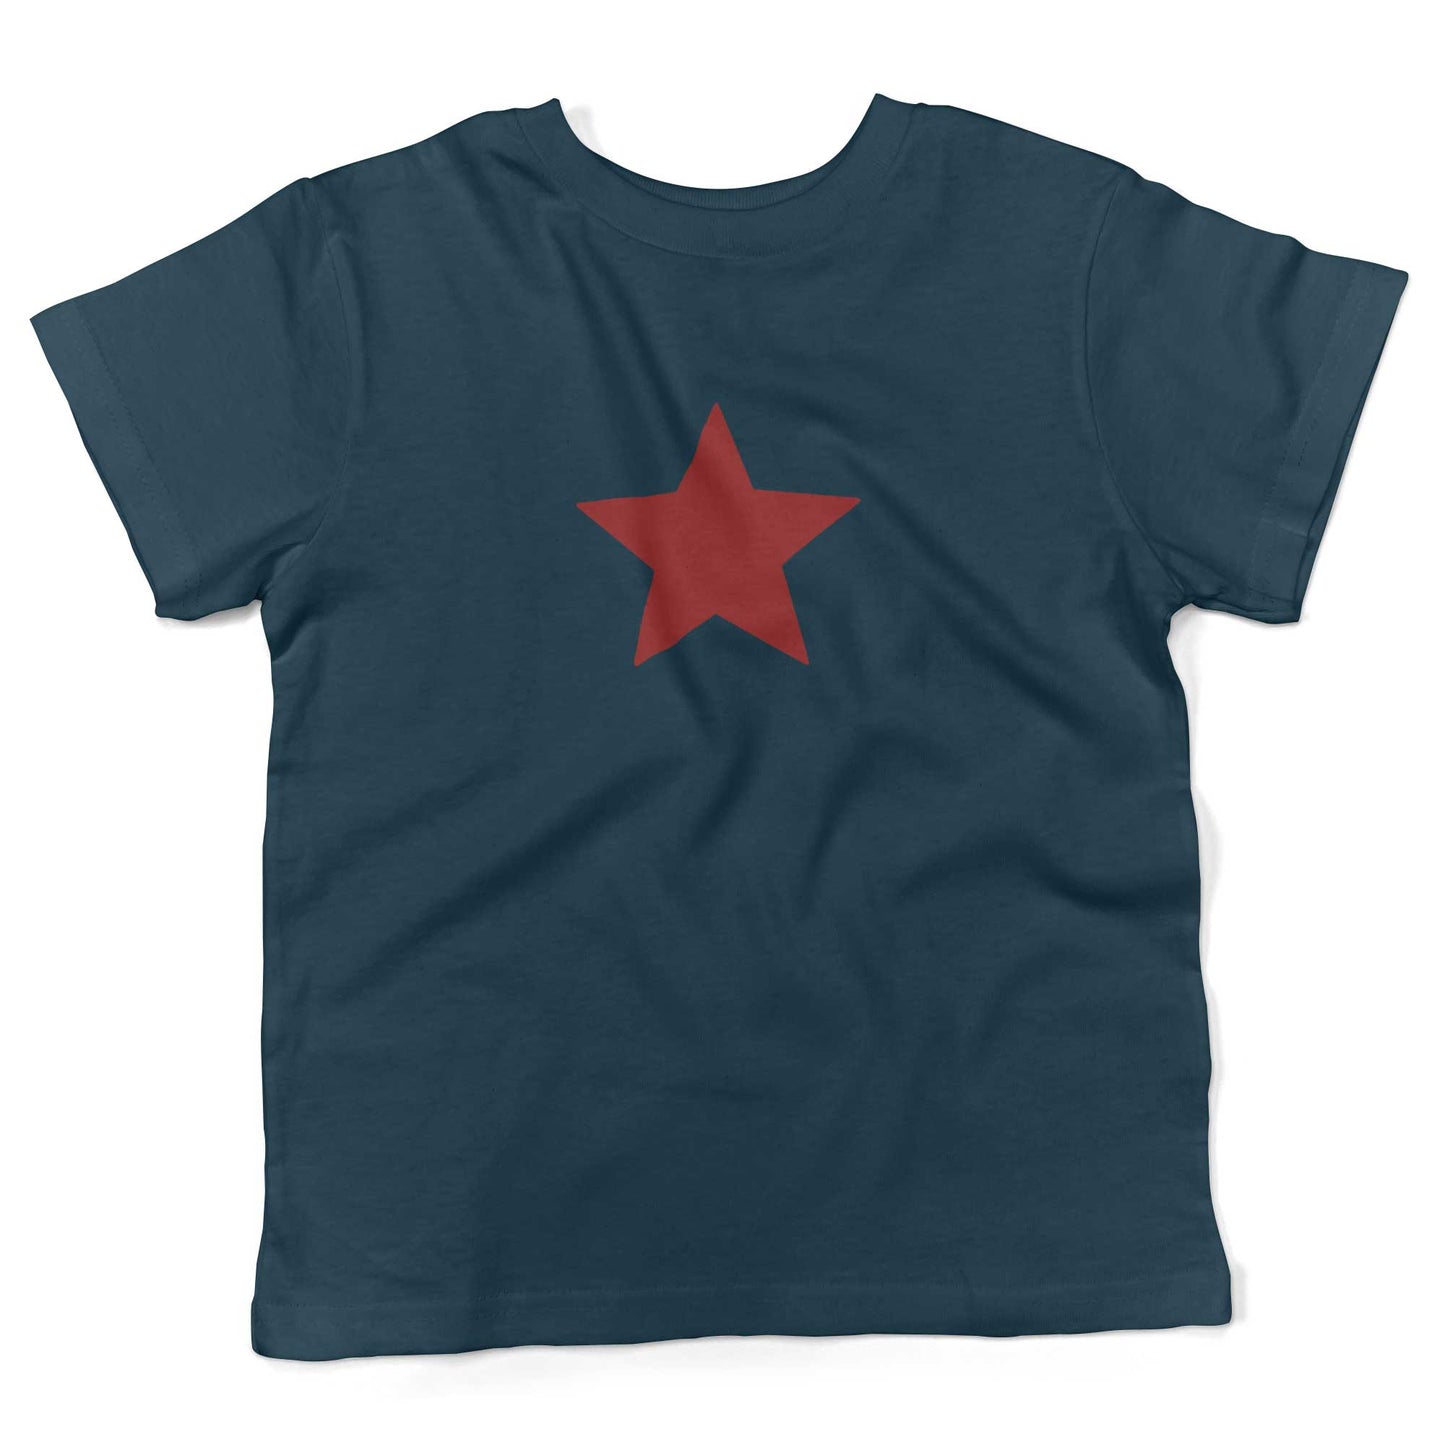 Five-Point Star Toddler Shirt-Organic Pacific Blue-Red Star